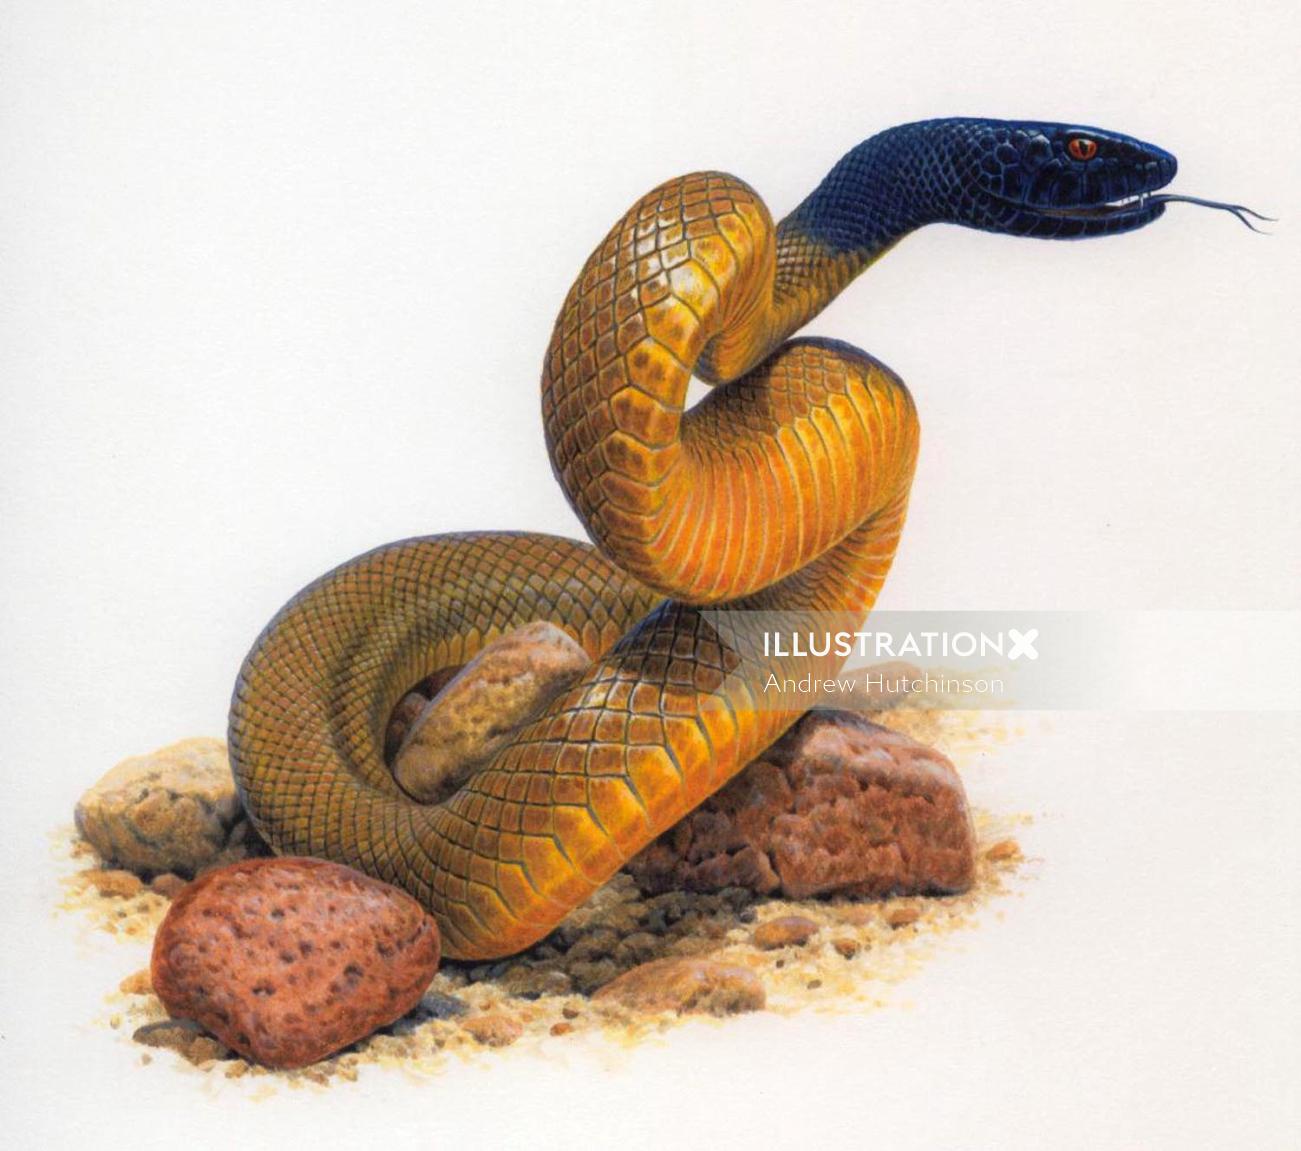 Snake Reptile Illustration, Wildlife Images © Andrew Hutchinson